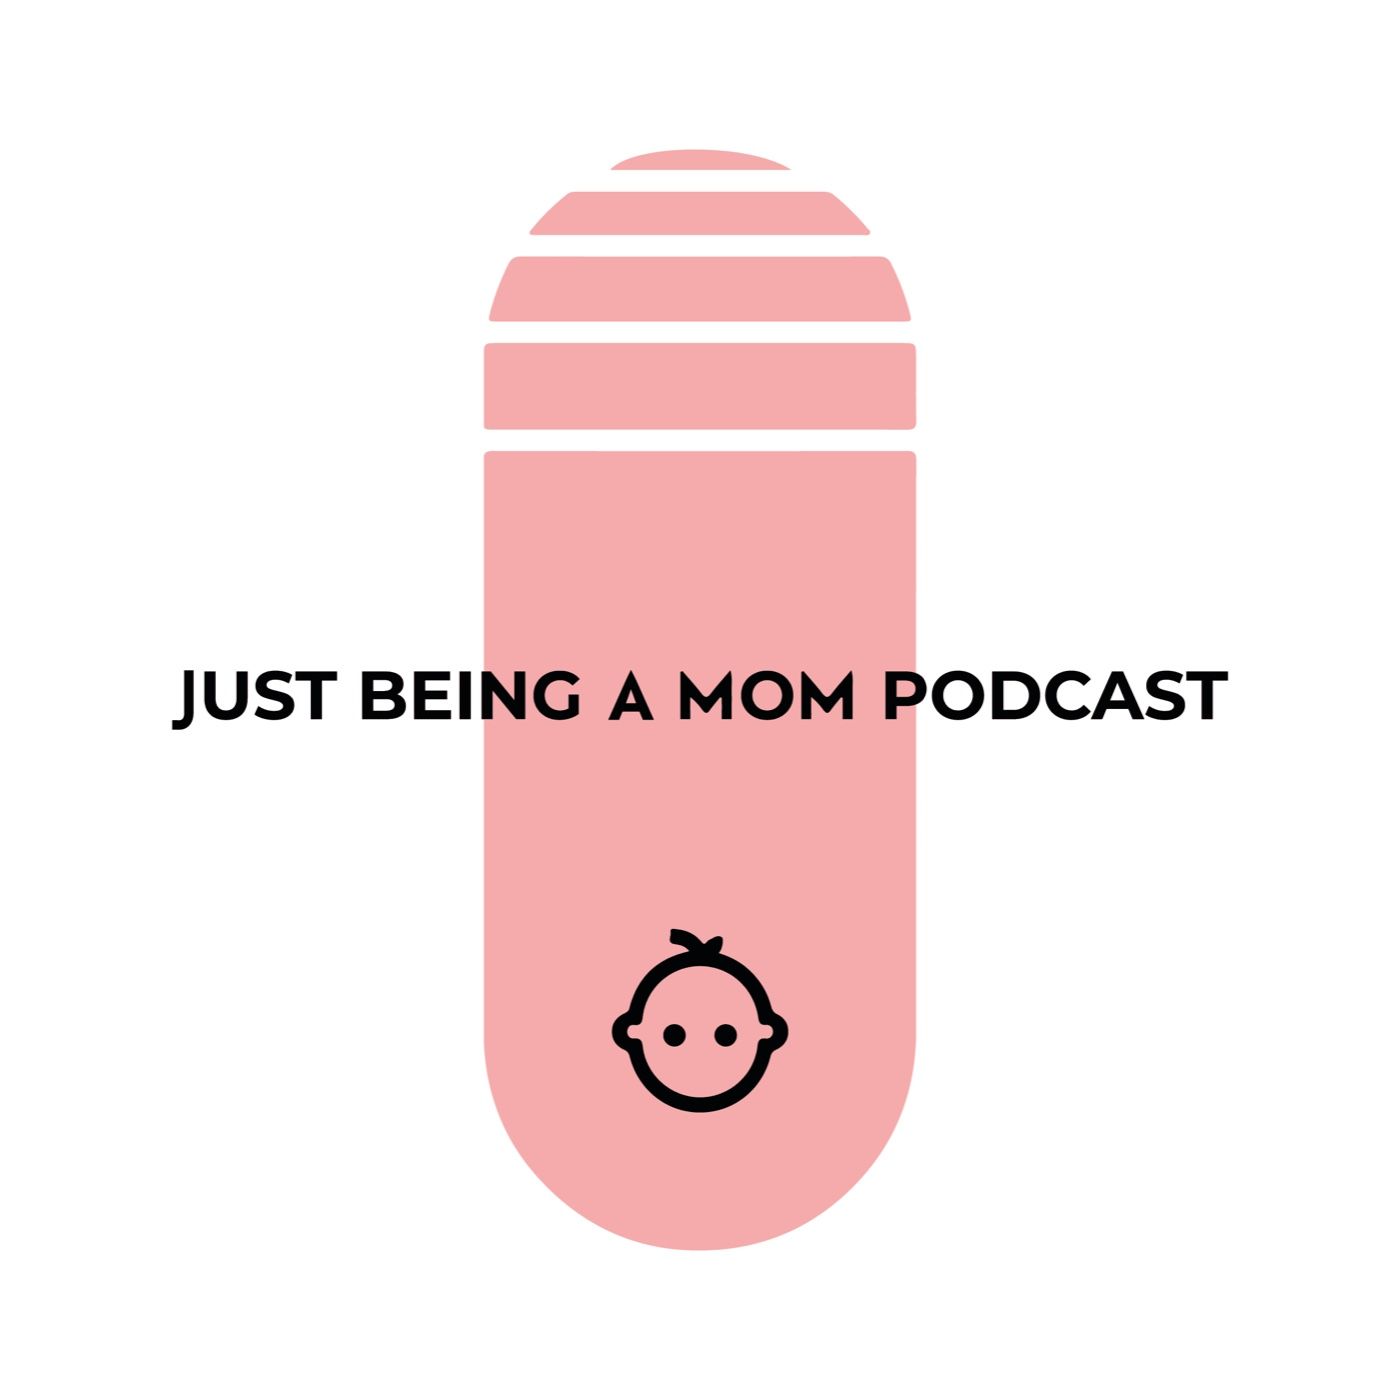 I’m Just Being A Mom Podcast’s show